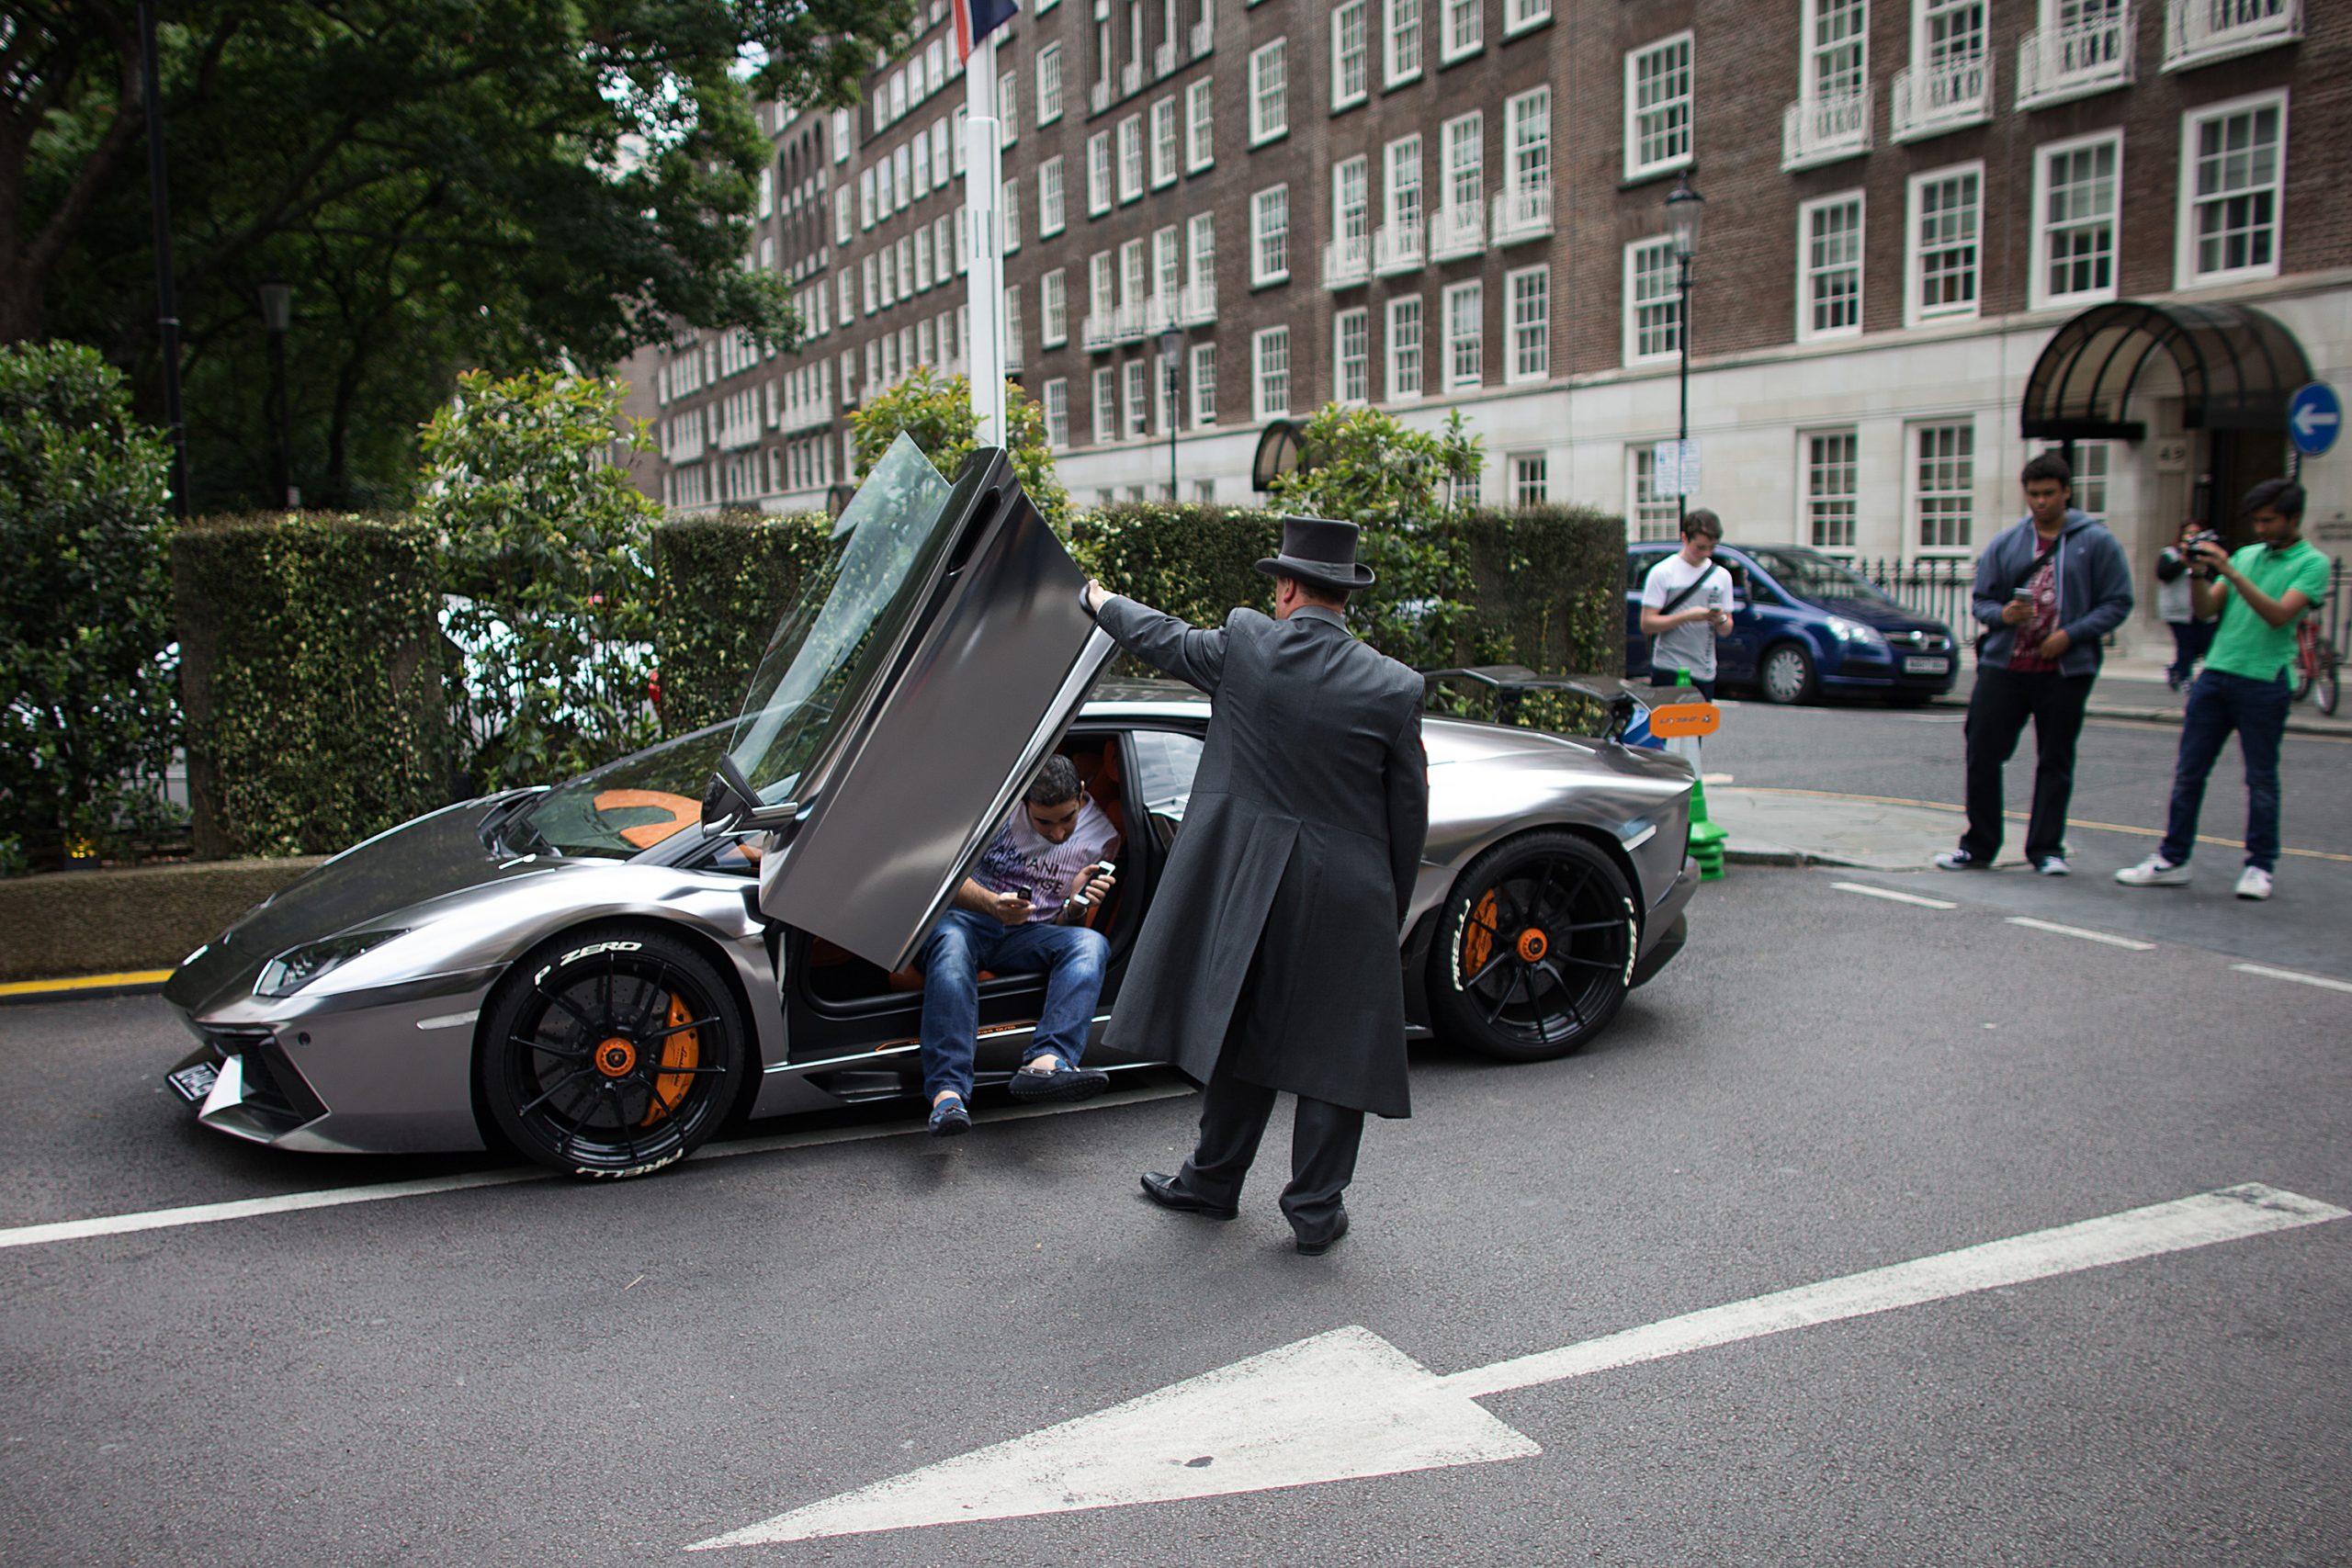 A valet helps an owner out of his silver Lamborghini supercar